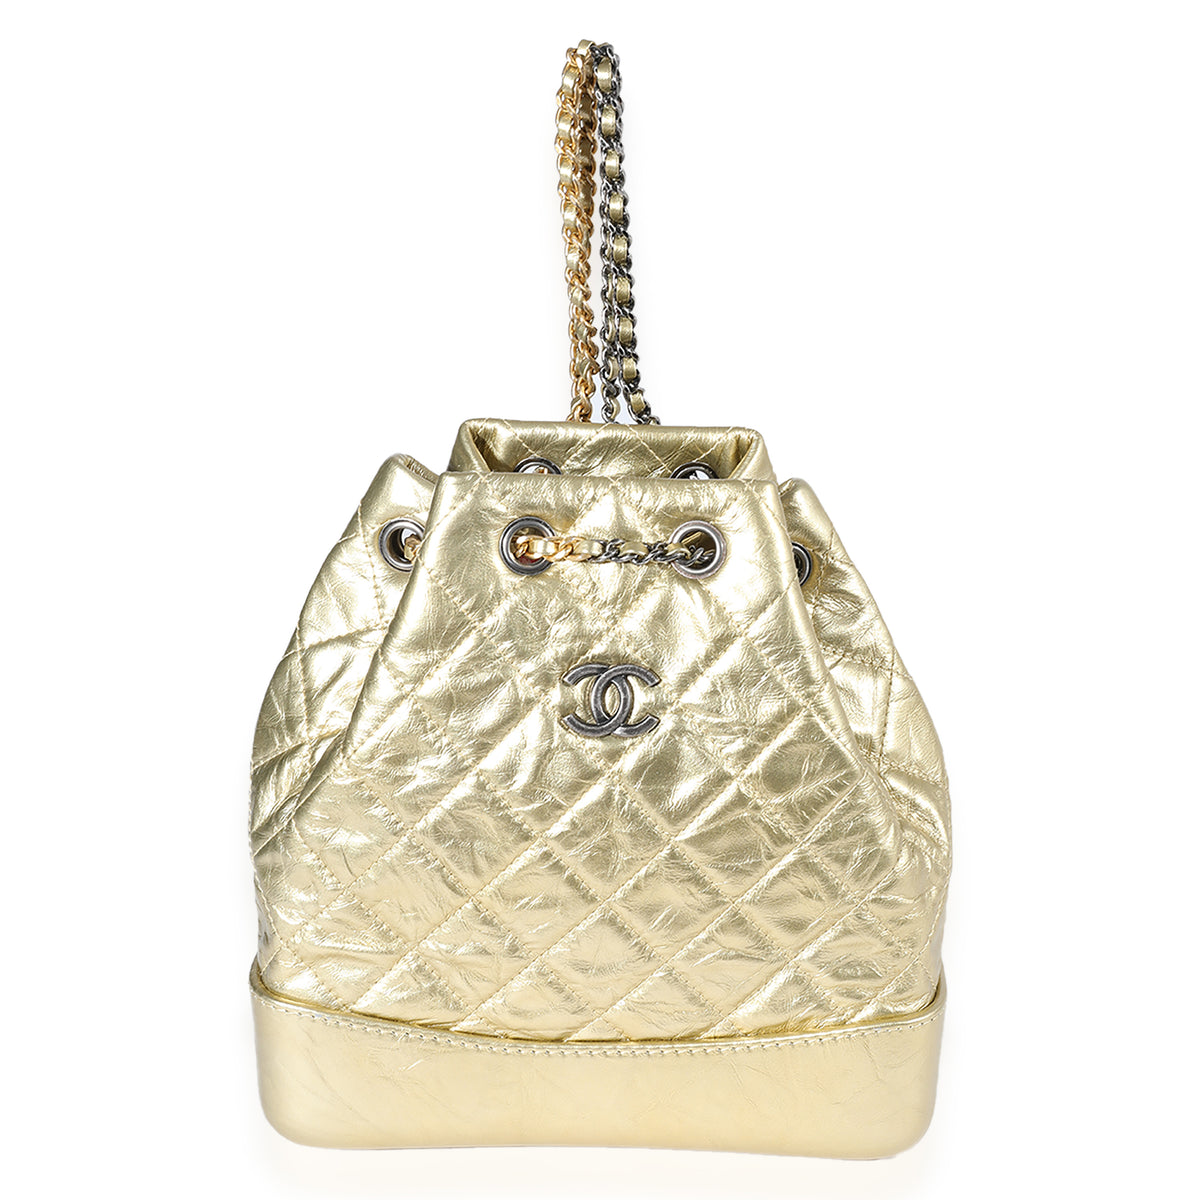 Chanel Metallic Gold Quilted Calfskin Small Gabrielle Backpack, myGemma, SG